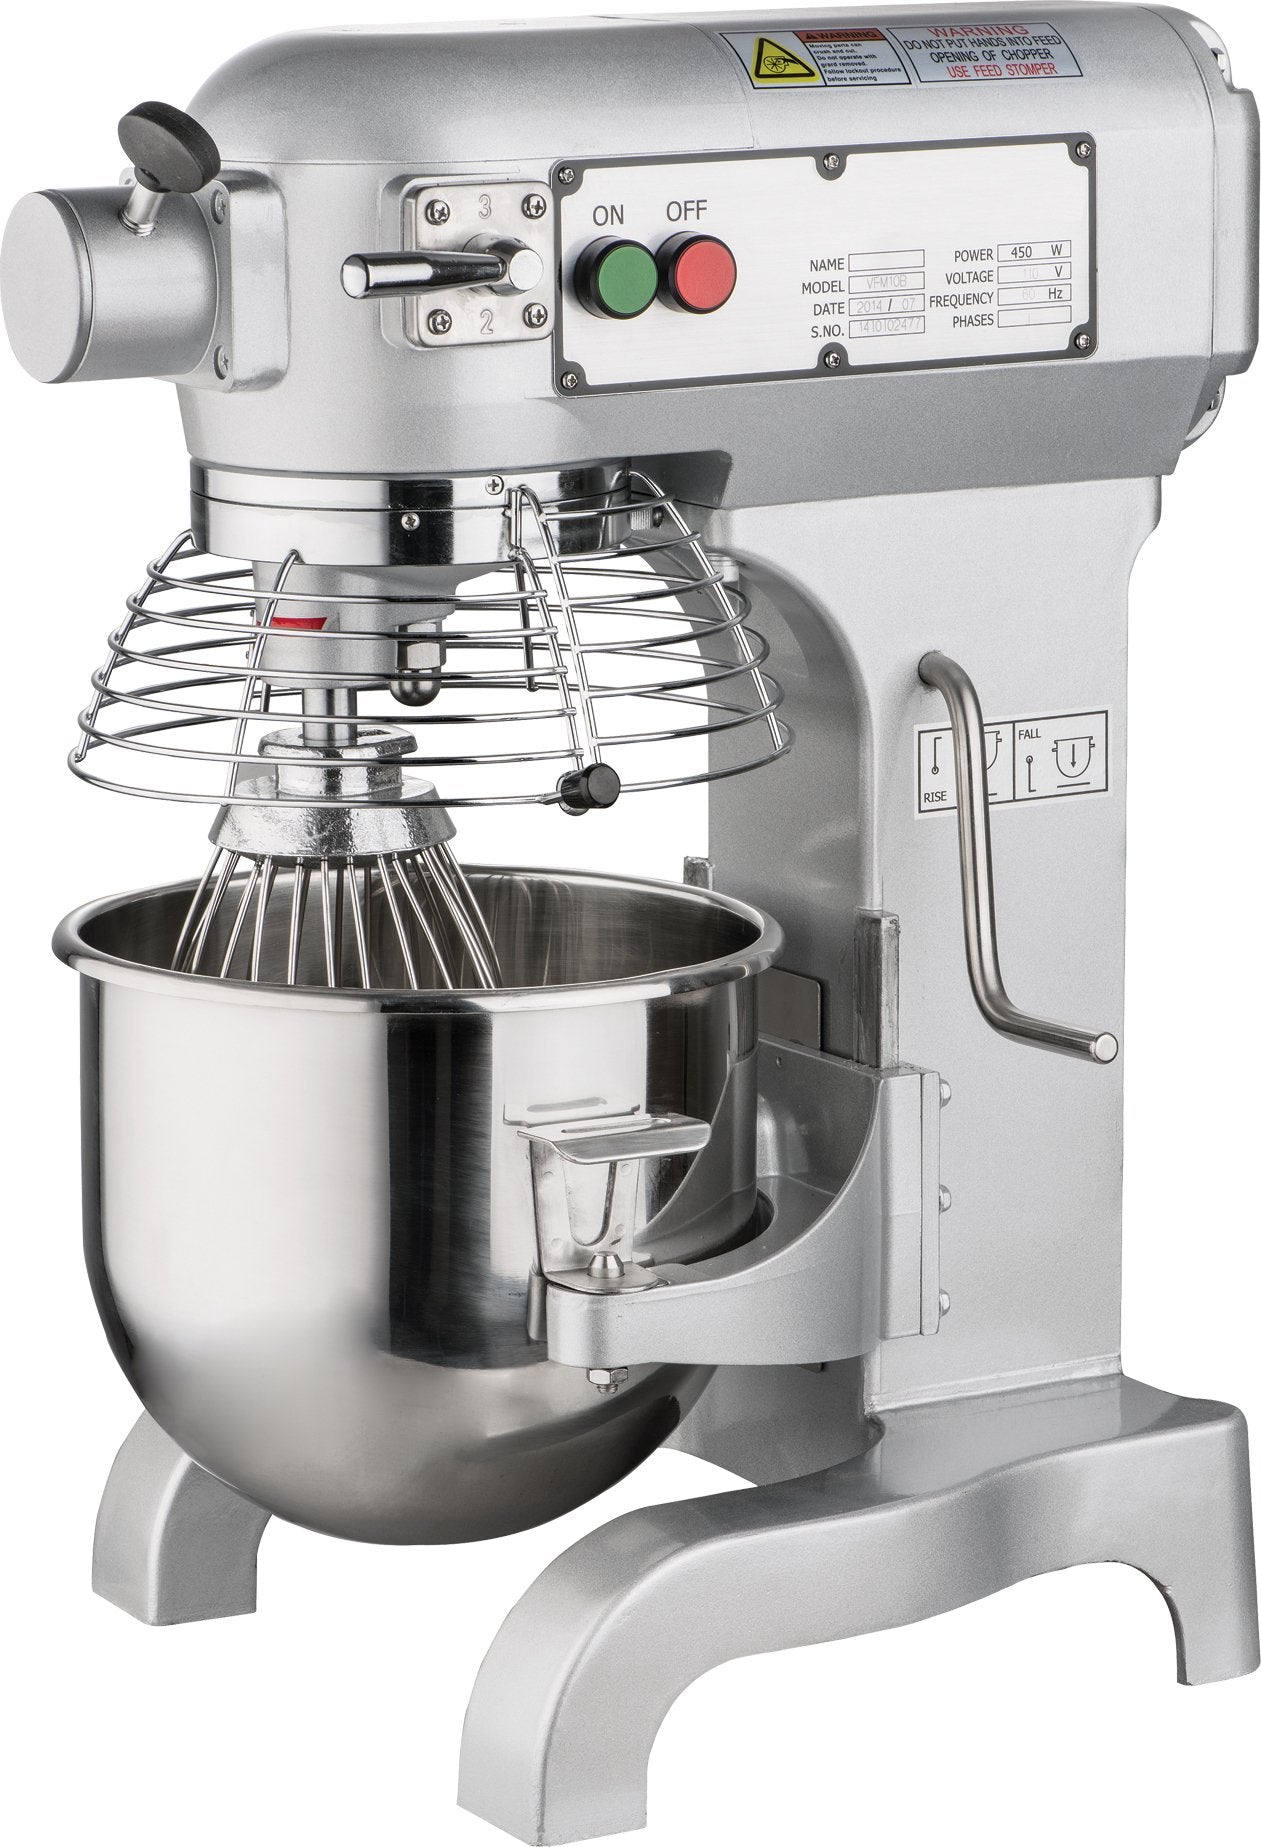 Omcan - 10 QT ETL-Certified Commercial Mixer with Guard - MX-CN-0010-G